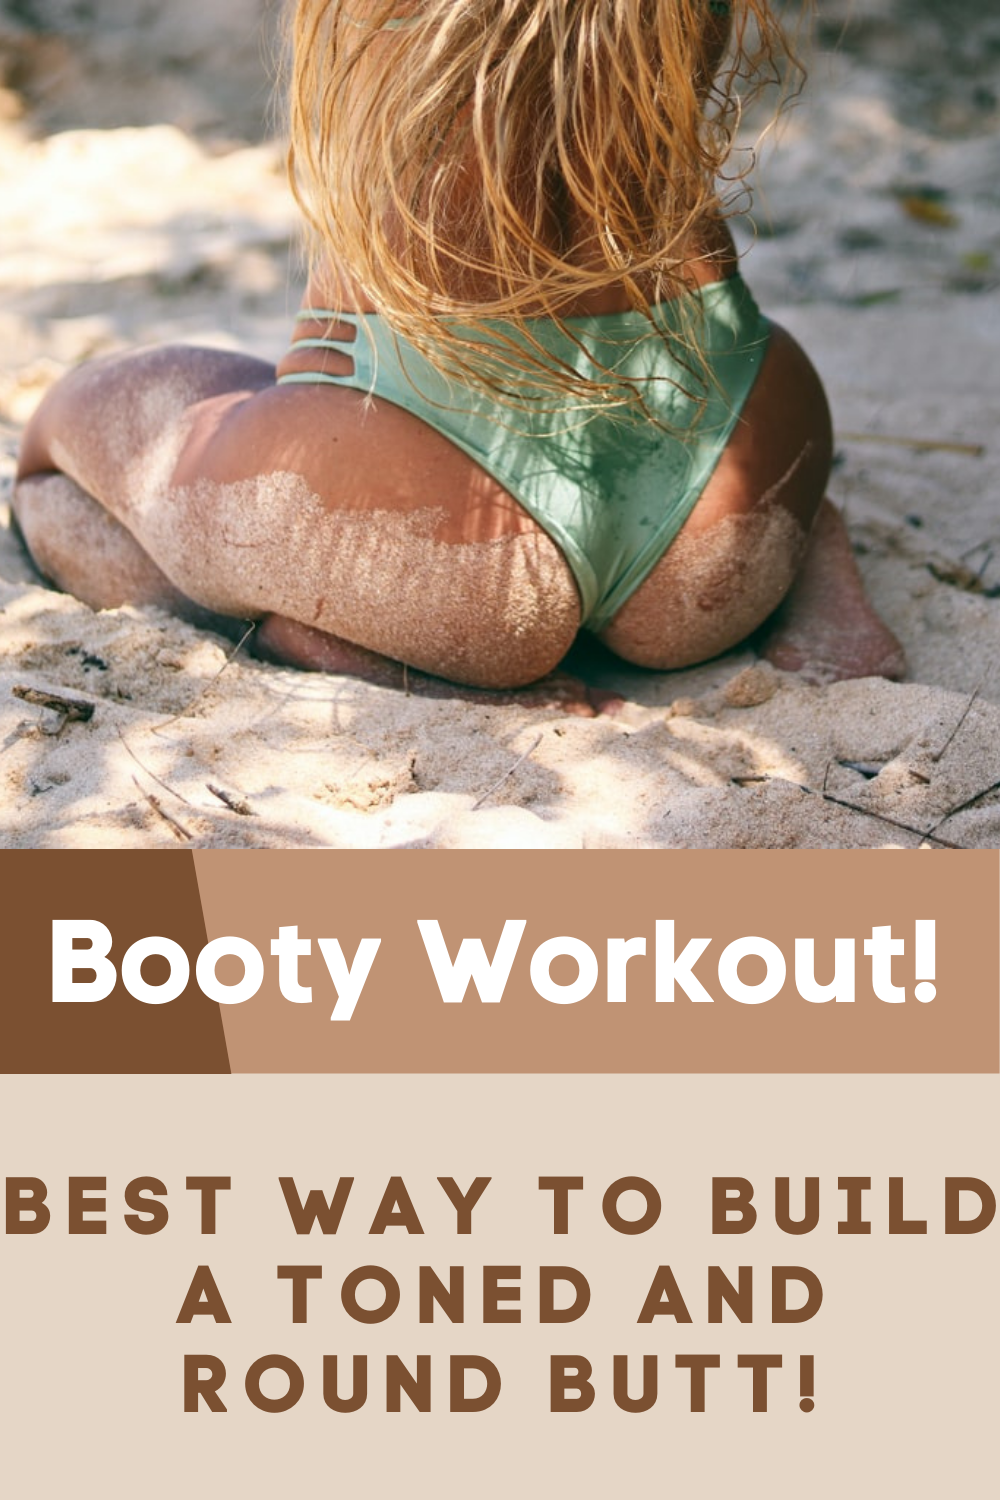 Best Way To Build A Toned And Round Butt